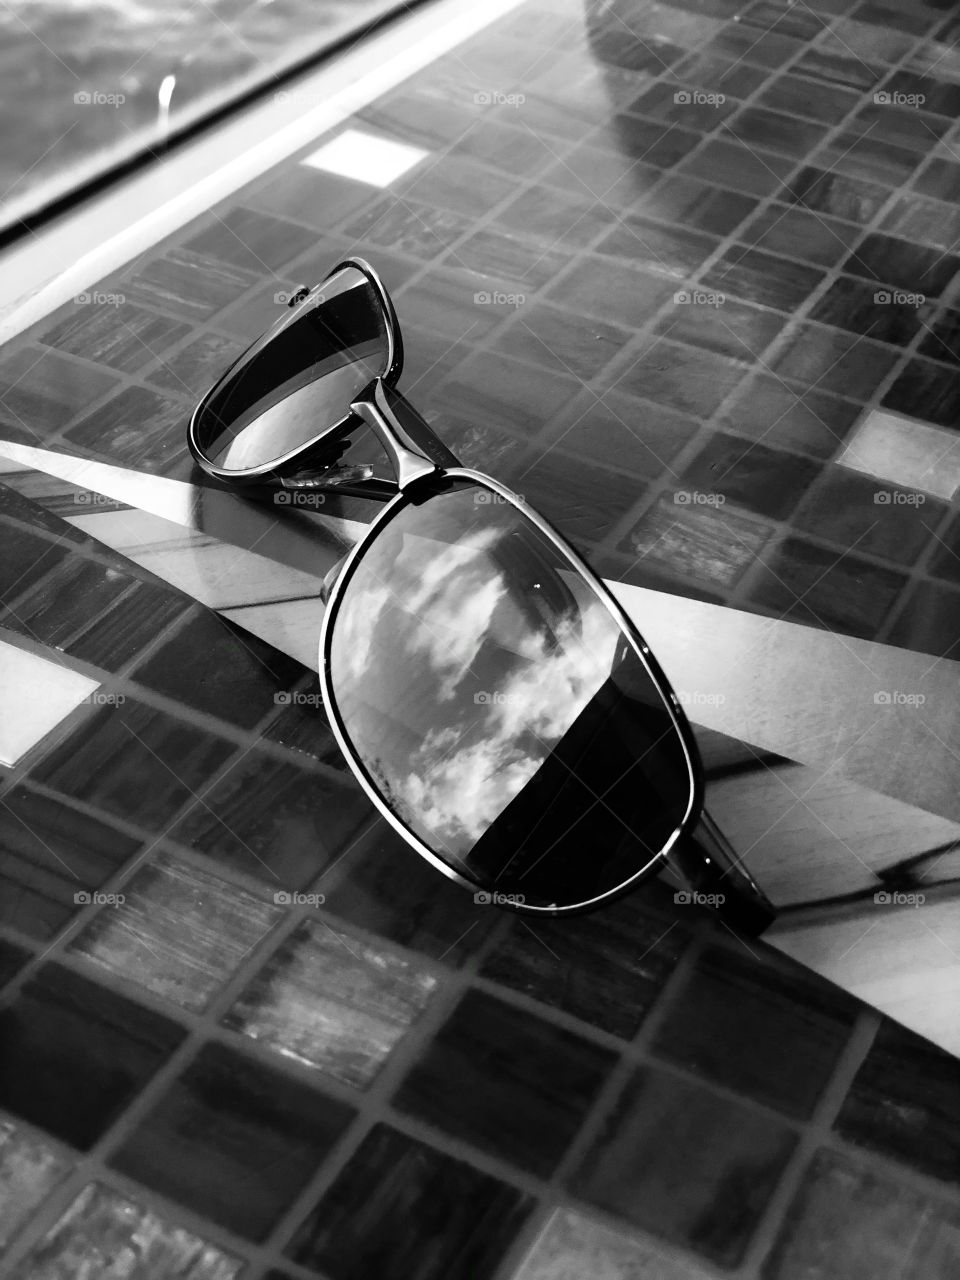 Sunglasses sitting on table about to be picked up. 